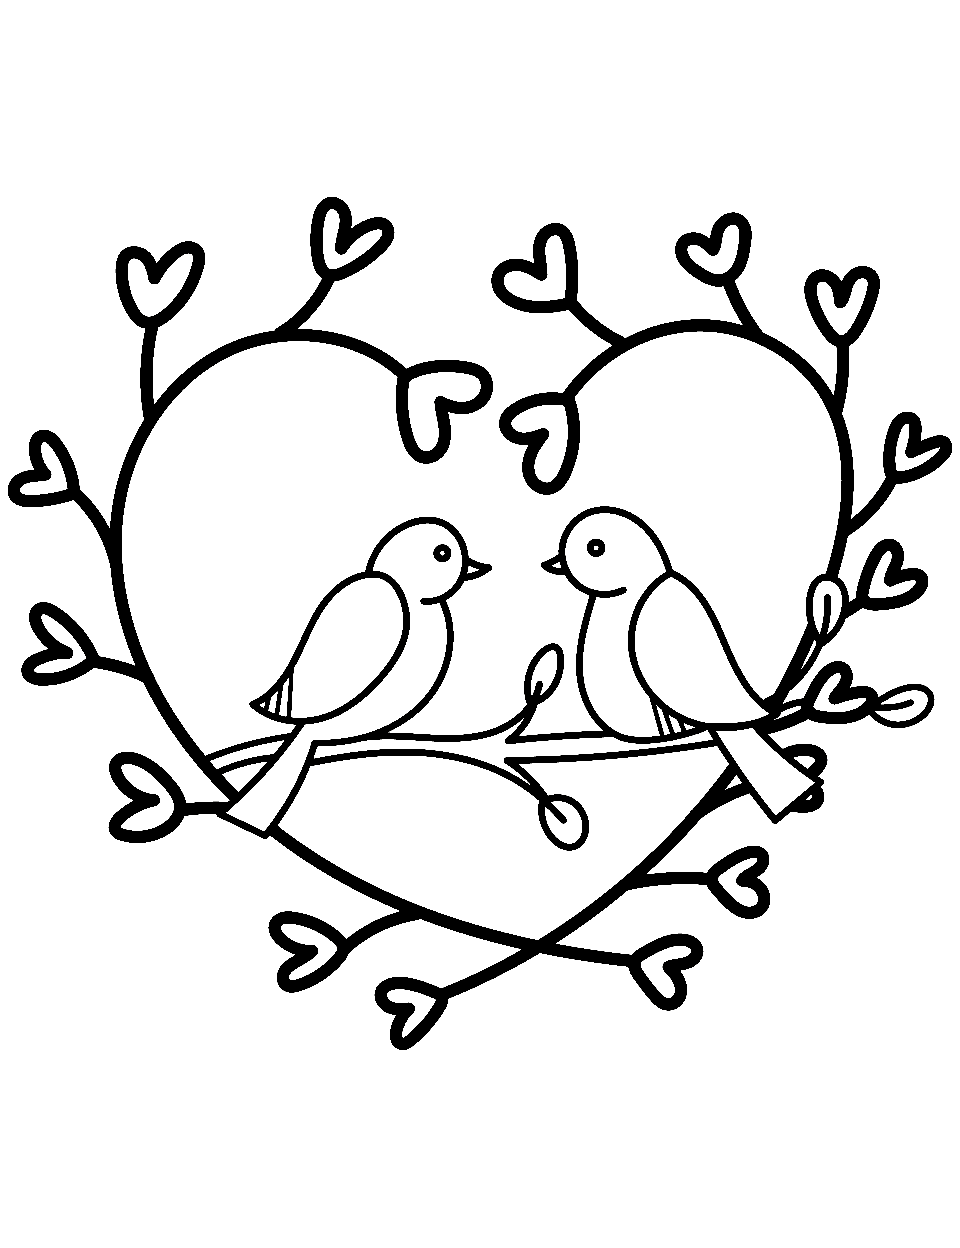 Married Birds on a Branch Coloring Page - Two lovebirds sitting on a branch with heart shaped vine encasing them.